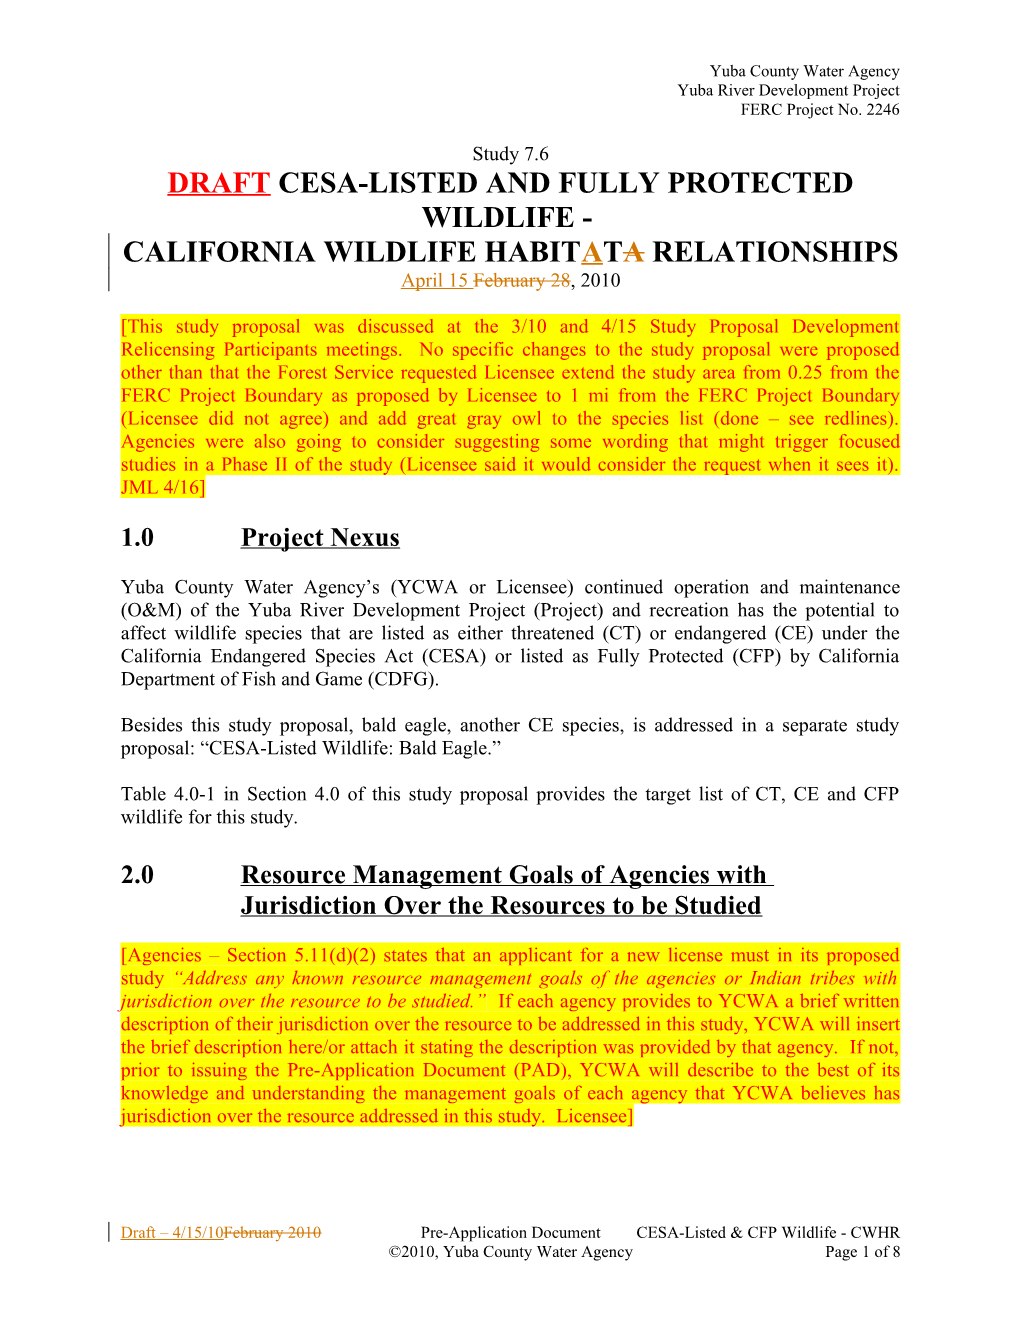 DRAFT Study Proposal WB-1 - Special-Status Plants s1